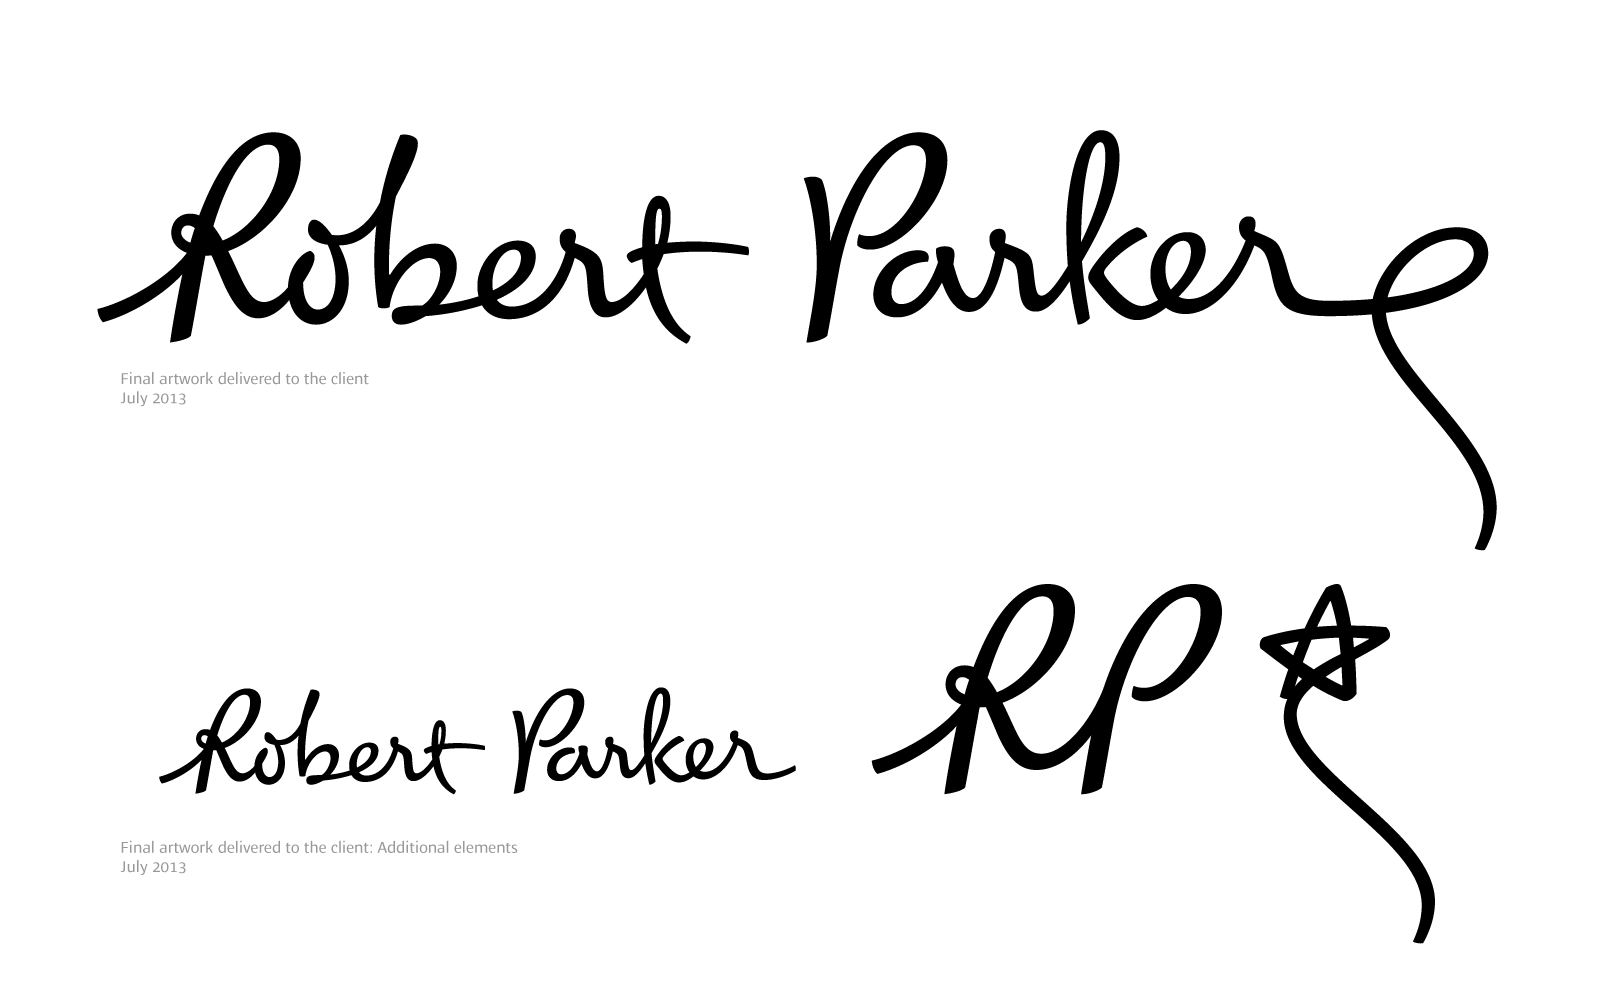 Logotype, Robert Parker, and Rejection